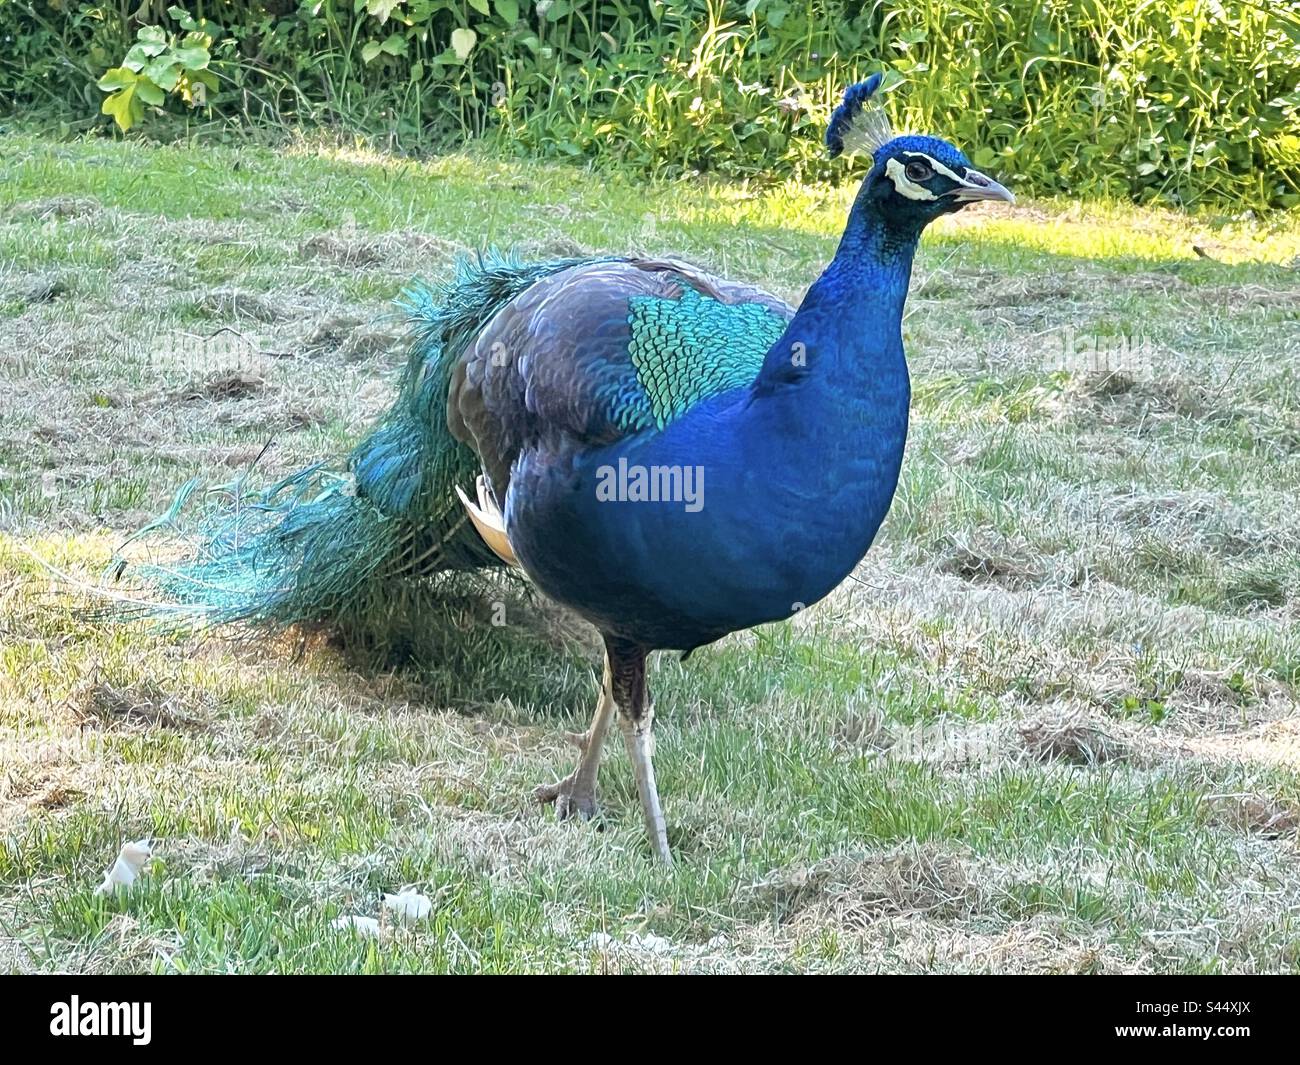 Peafowl, peacock, feathers, plumage, blue, spectacular, decorative, Pavo cristatus, Common peafowl, crest, crown, feathers, male, tail, train, iridescence, iridescent, colourful, Stock Photo